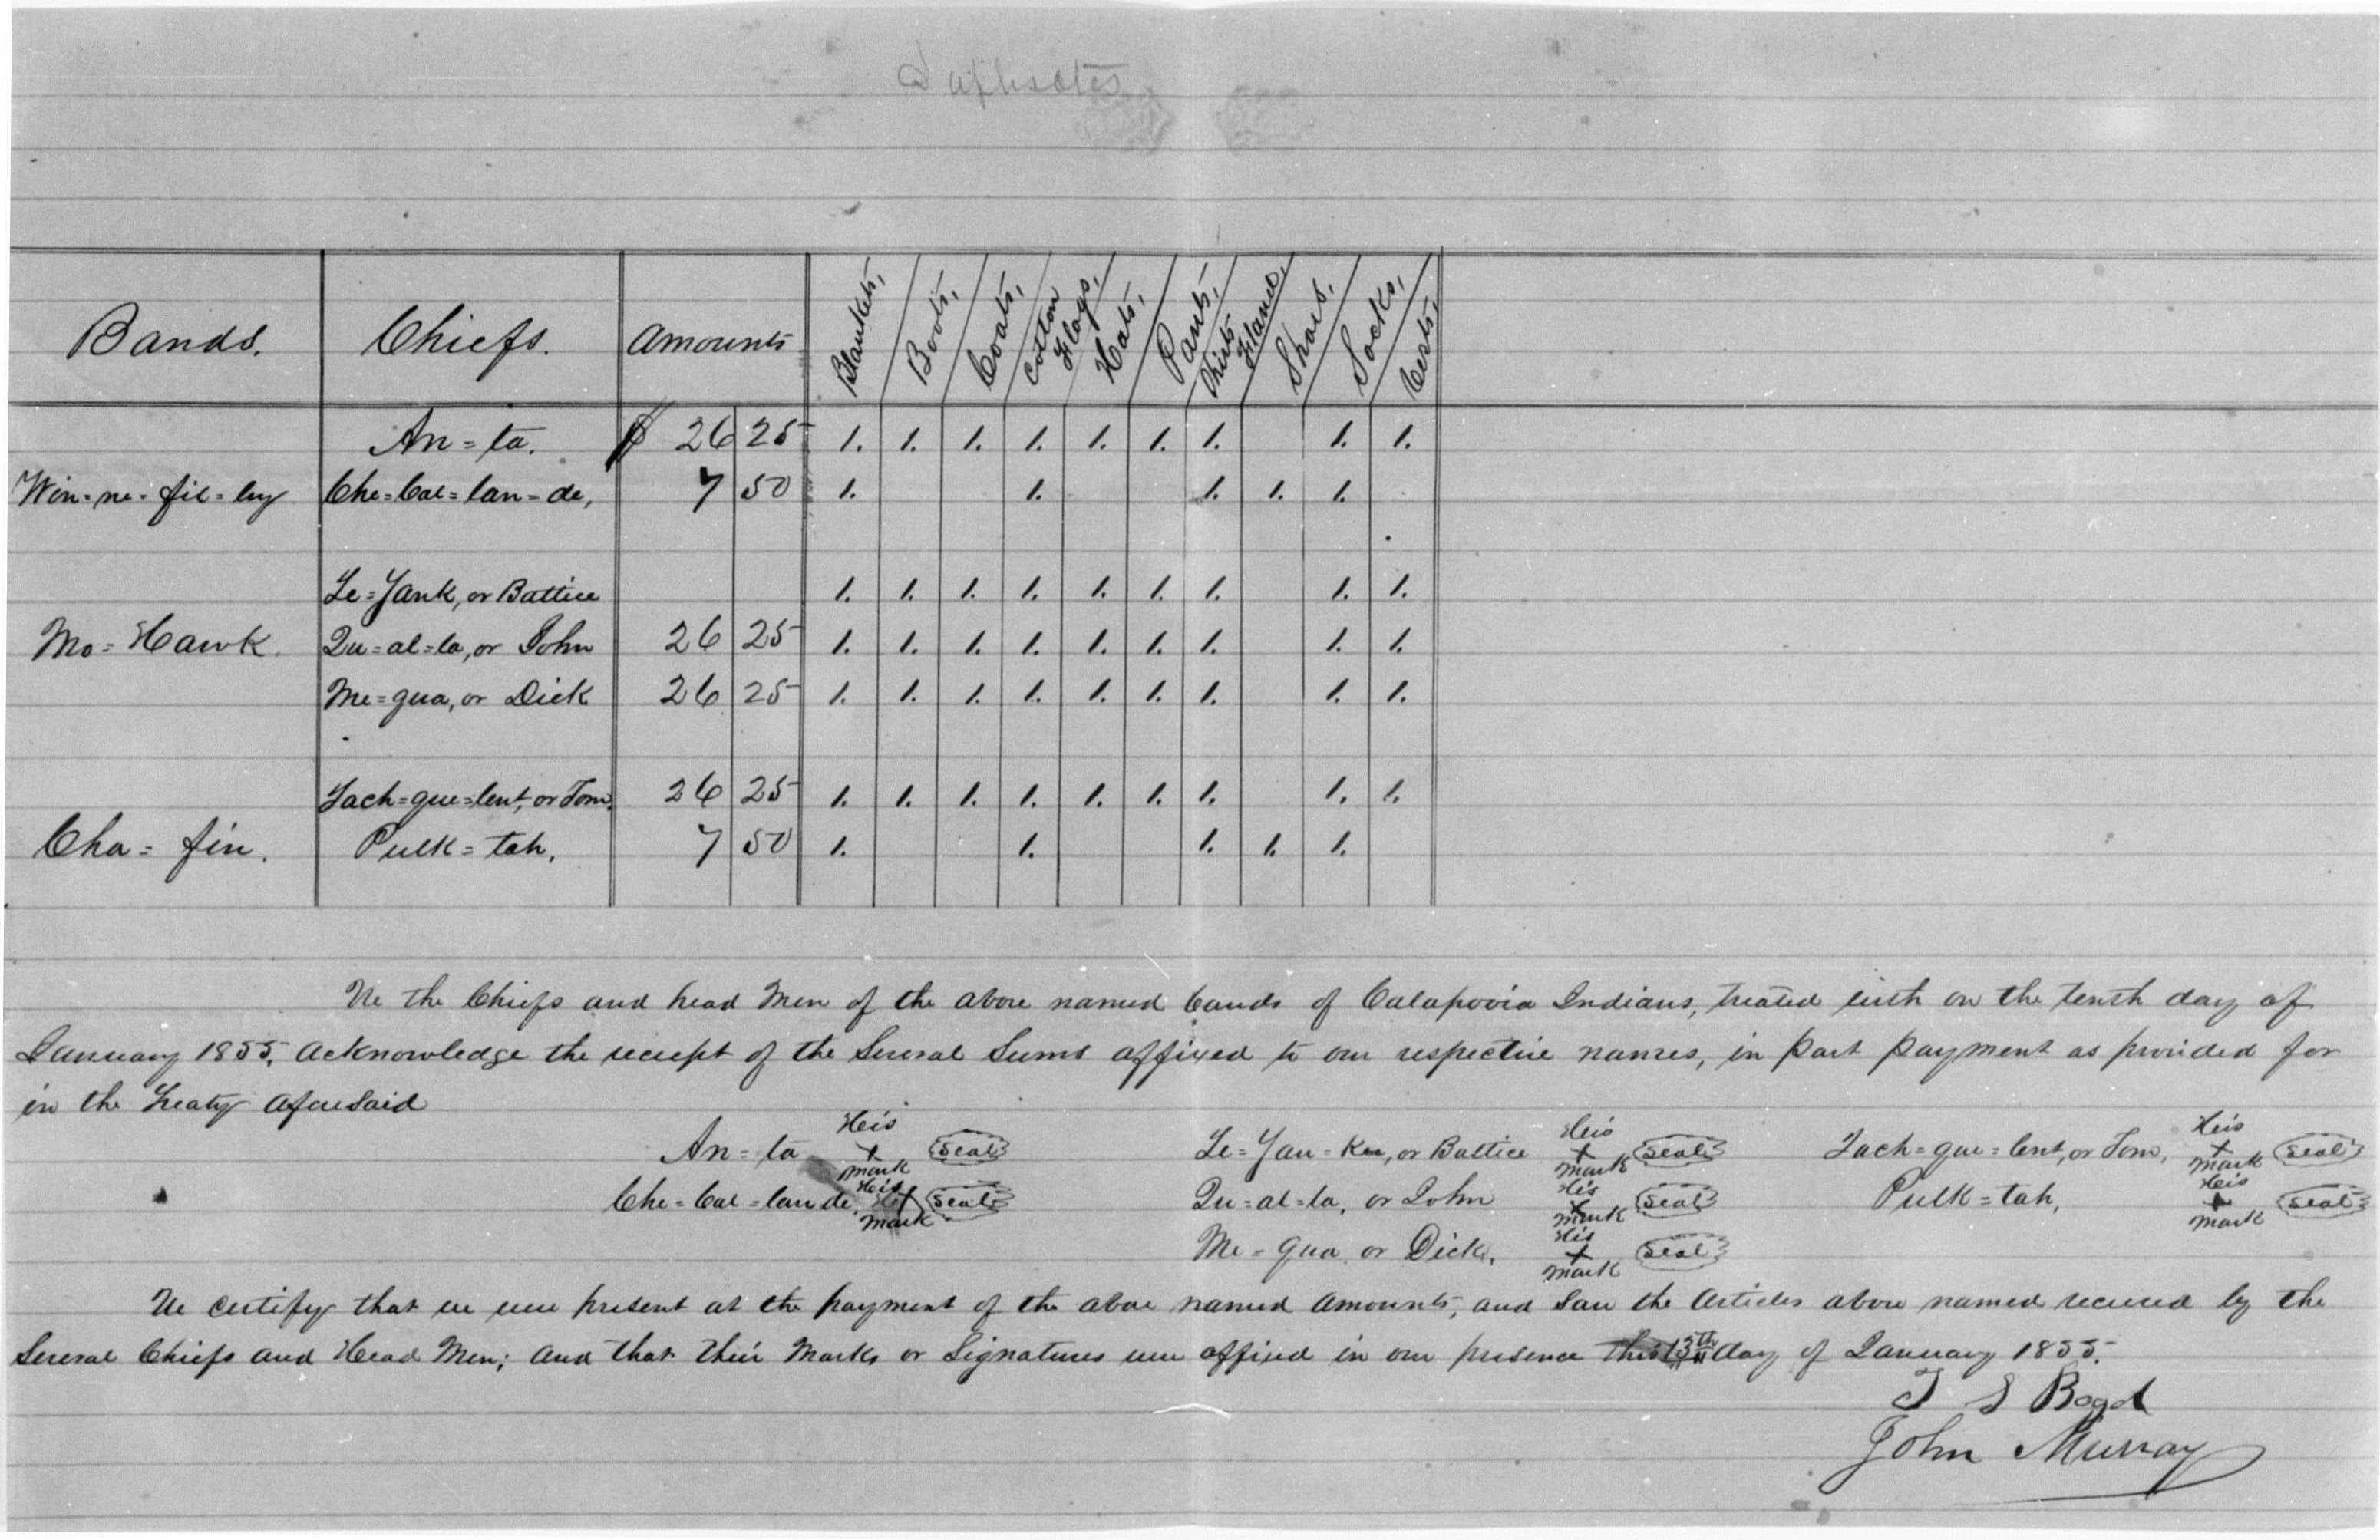 Calapooia Indian clothing invoice 1855